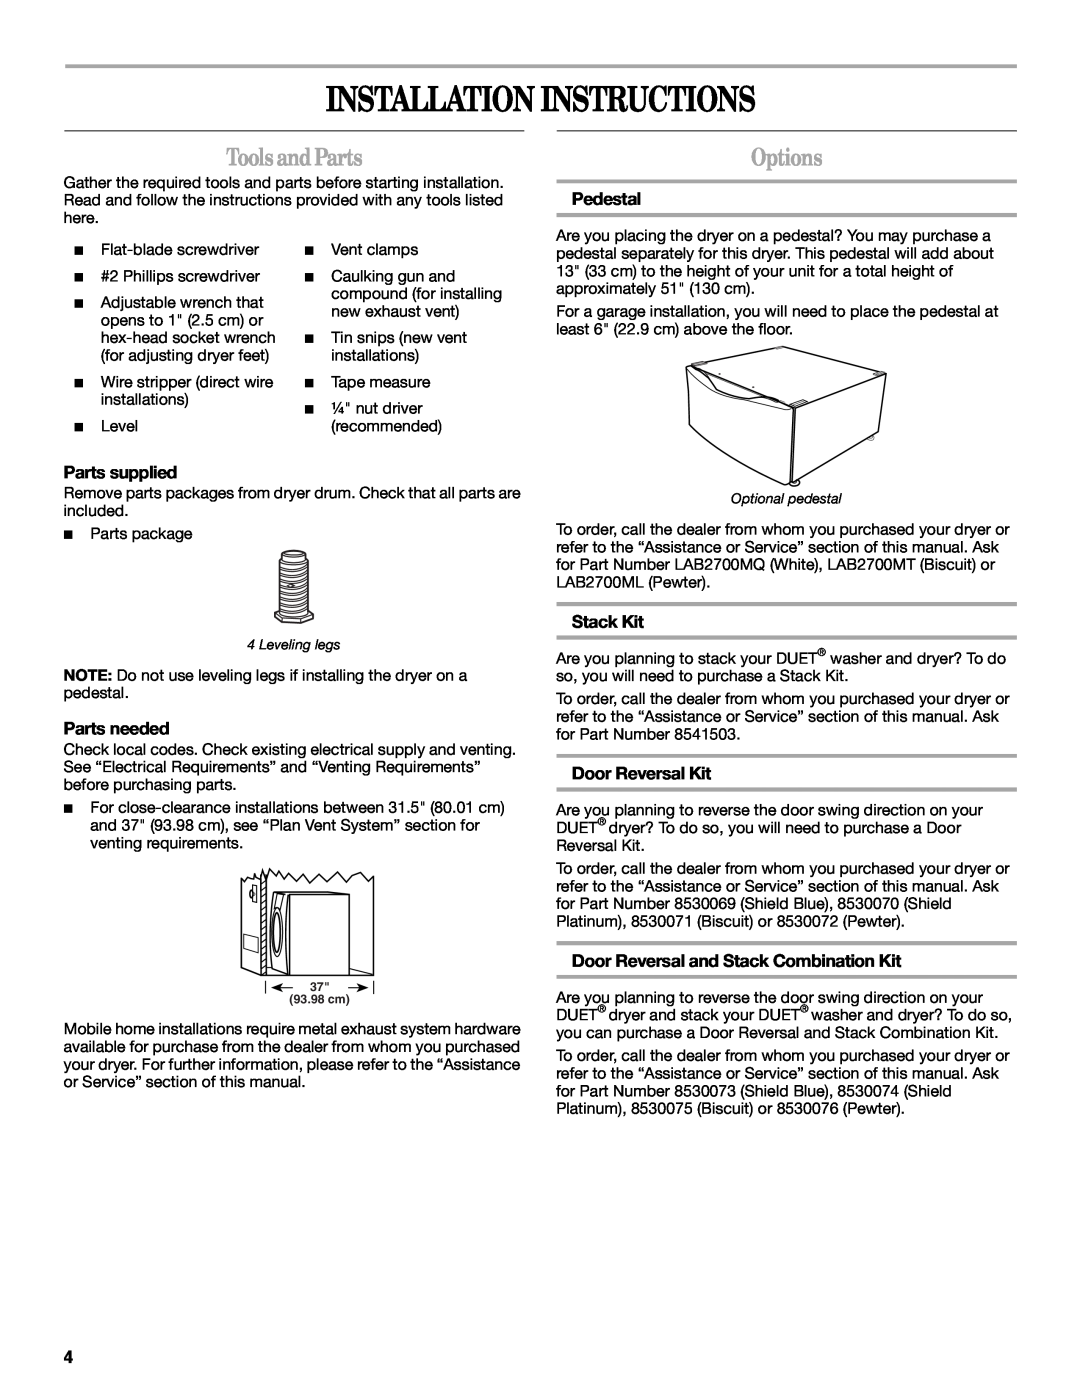 Whirlpool GEW9260PL1 manual Installation Instructions, Tools and Parts, Options, Pedestal, Parts supplied, Parts needed 